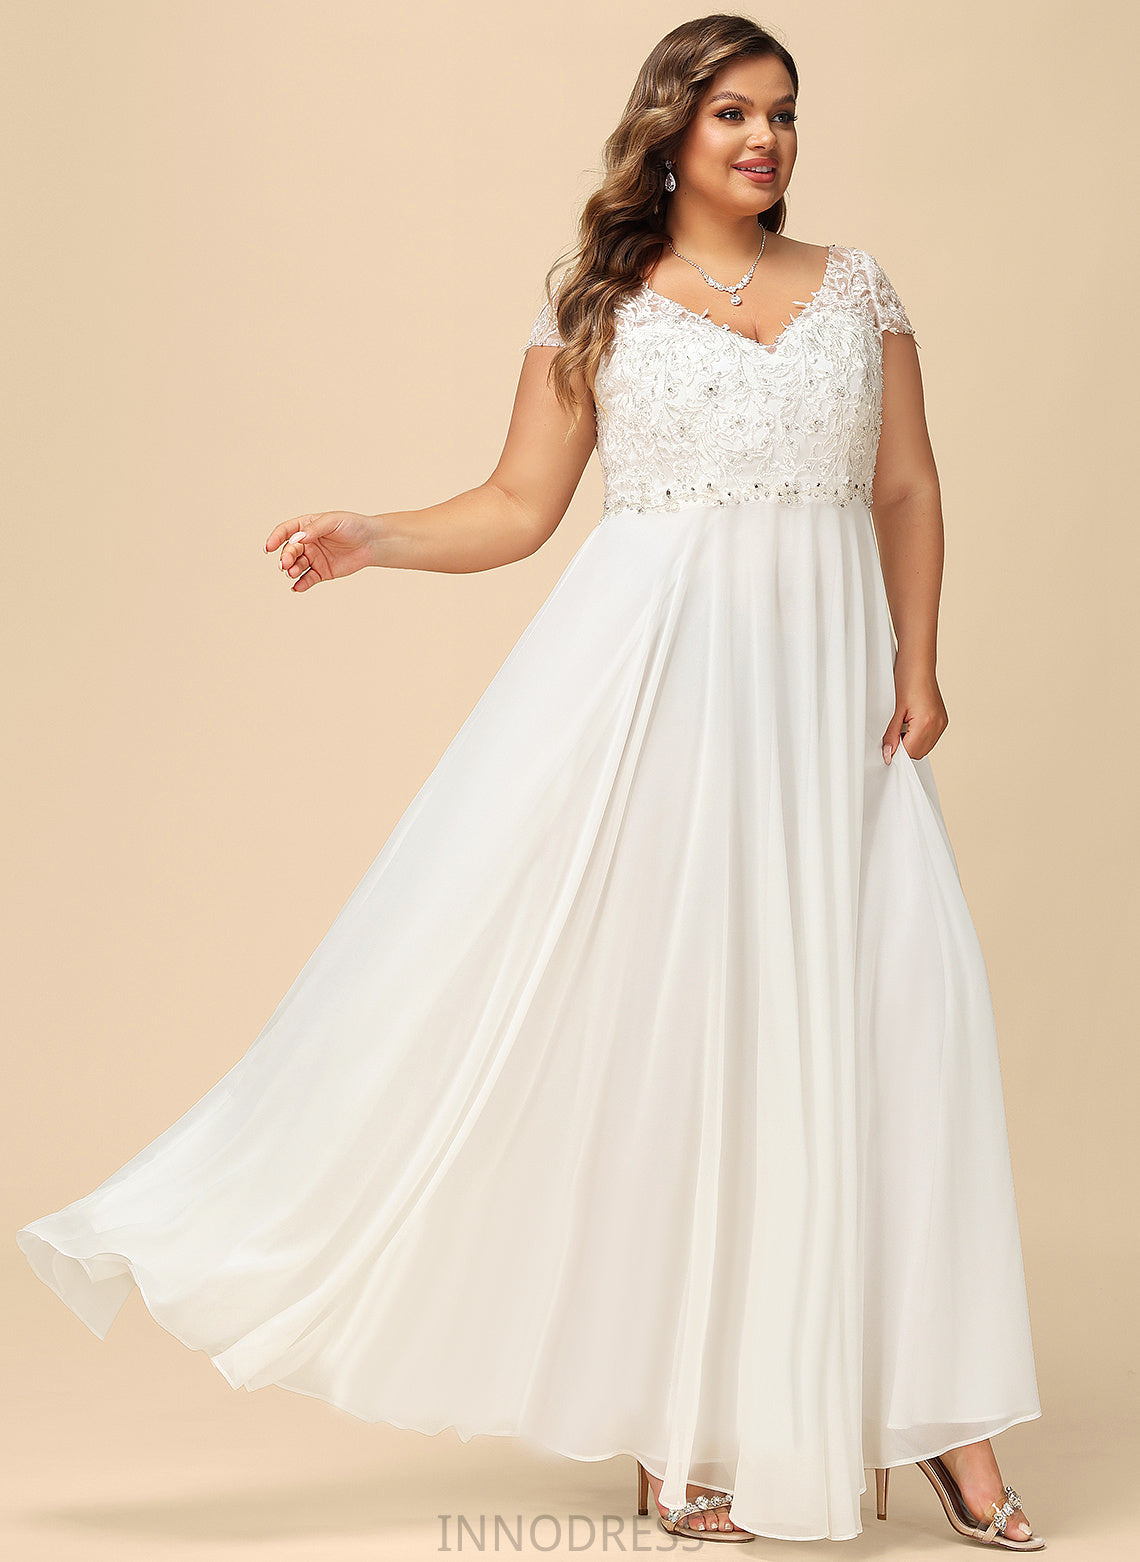 Lace With Dress A-Line Wedding Dresses Floor-Length V-neck Beading Chiffon Sequins Wedding Sophronia